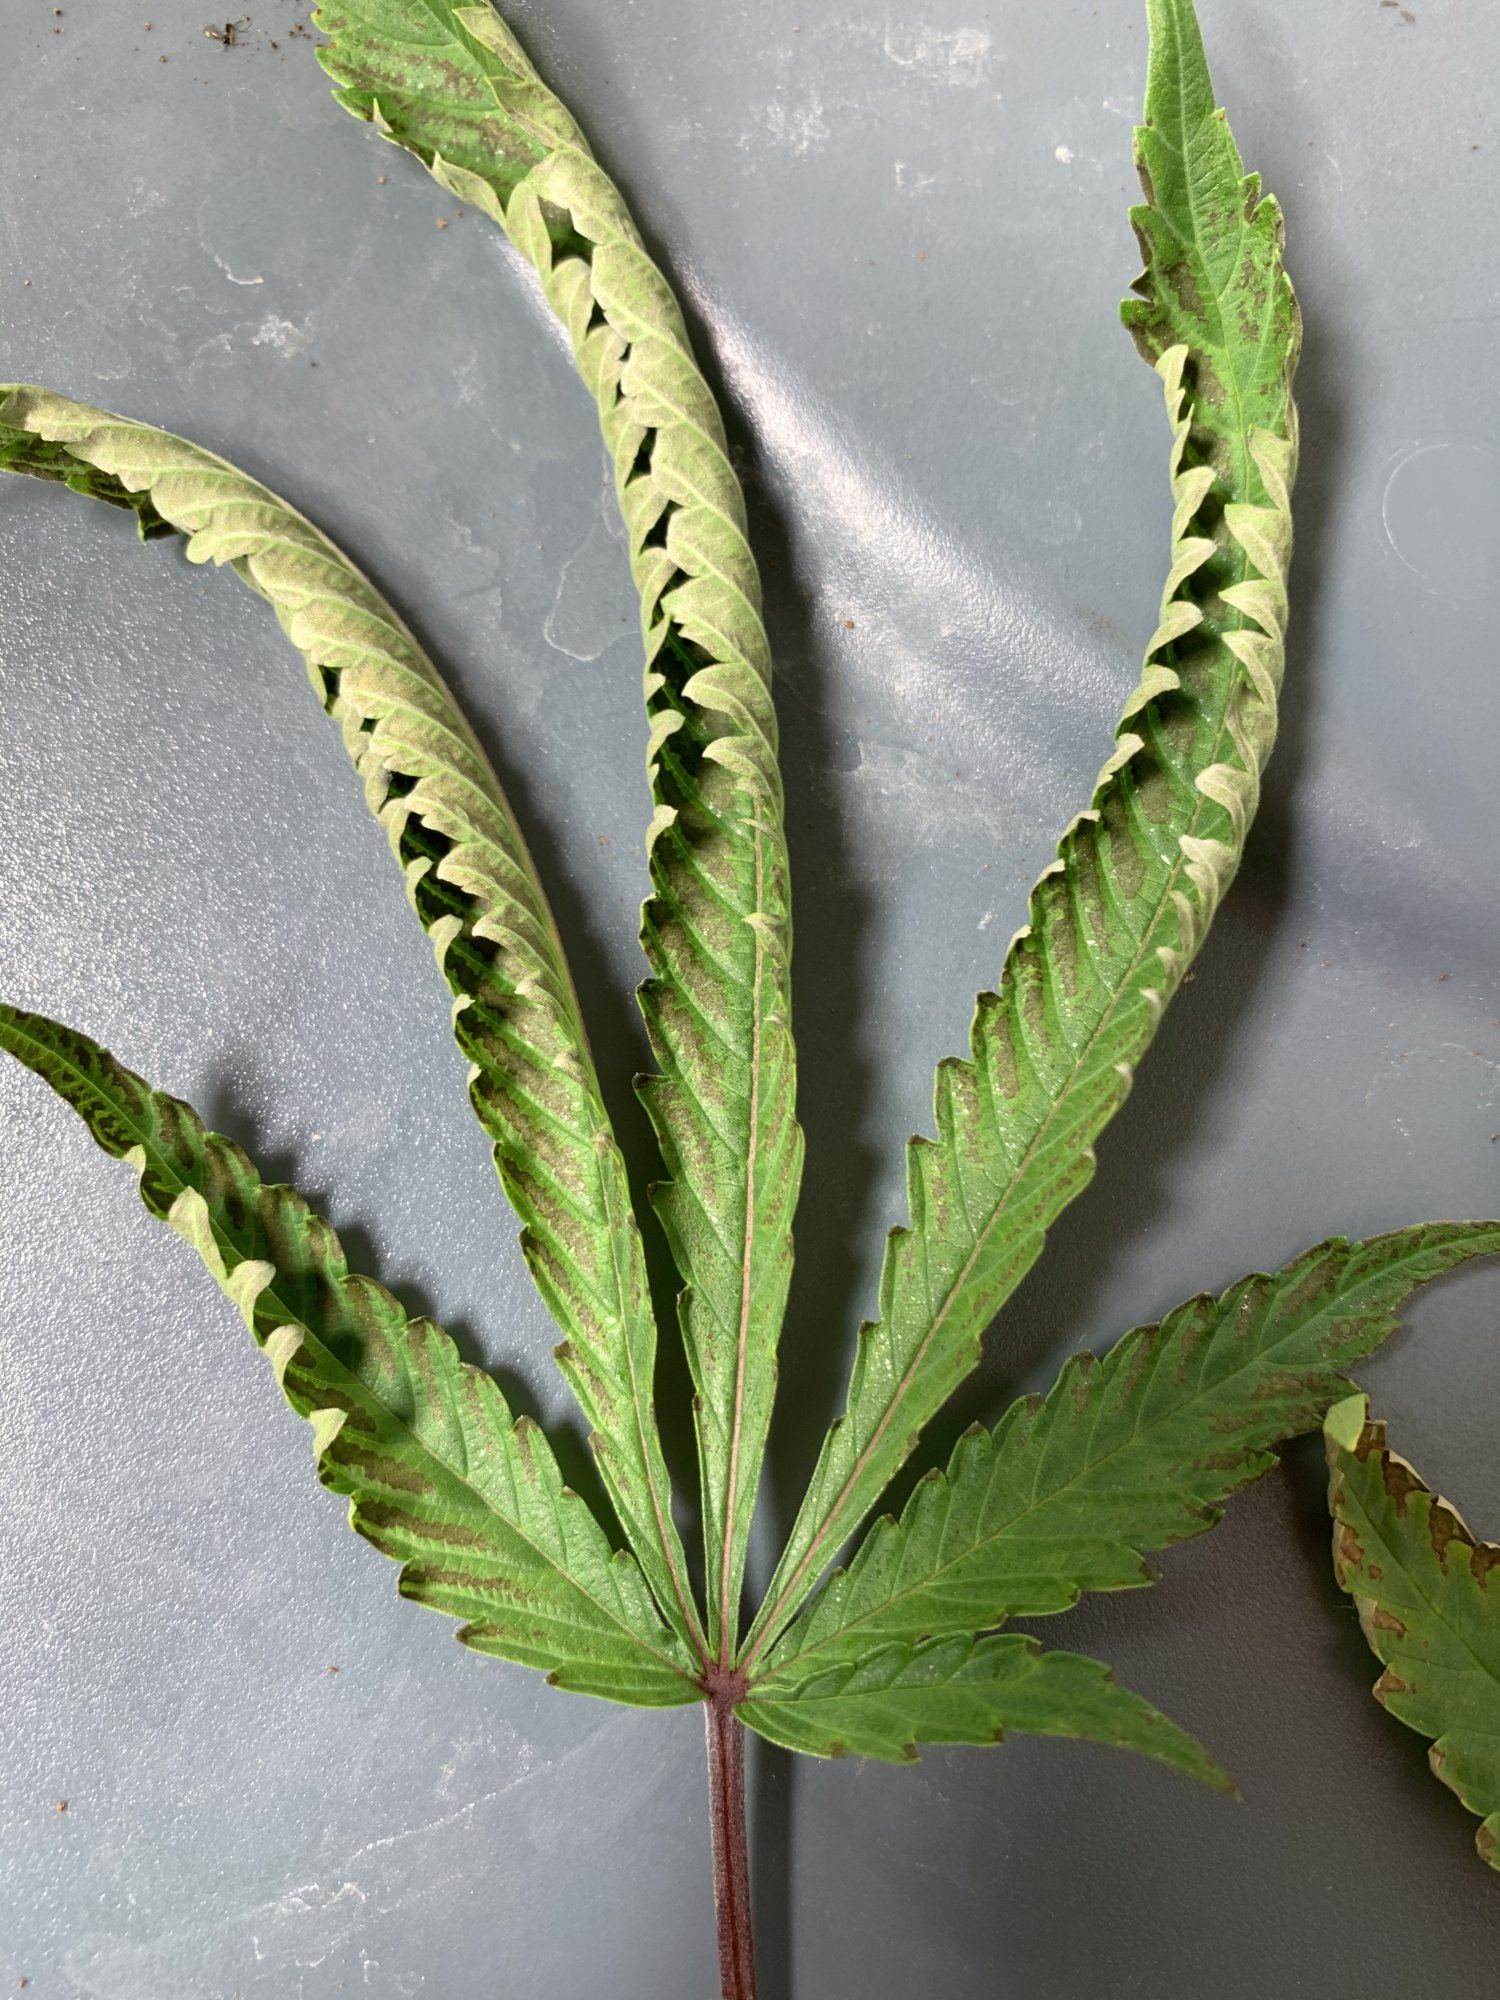 What deficiency 3